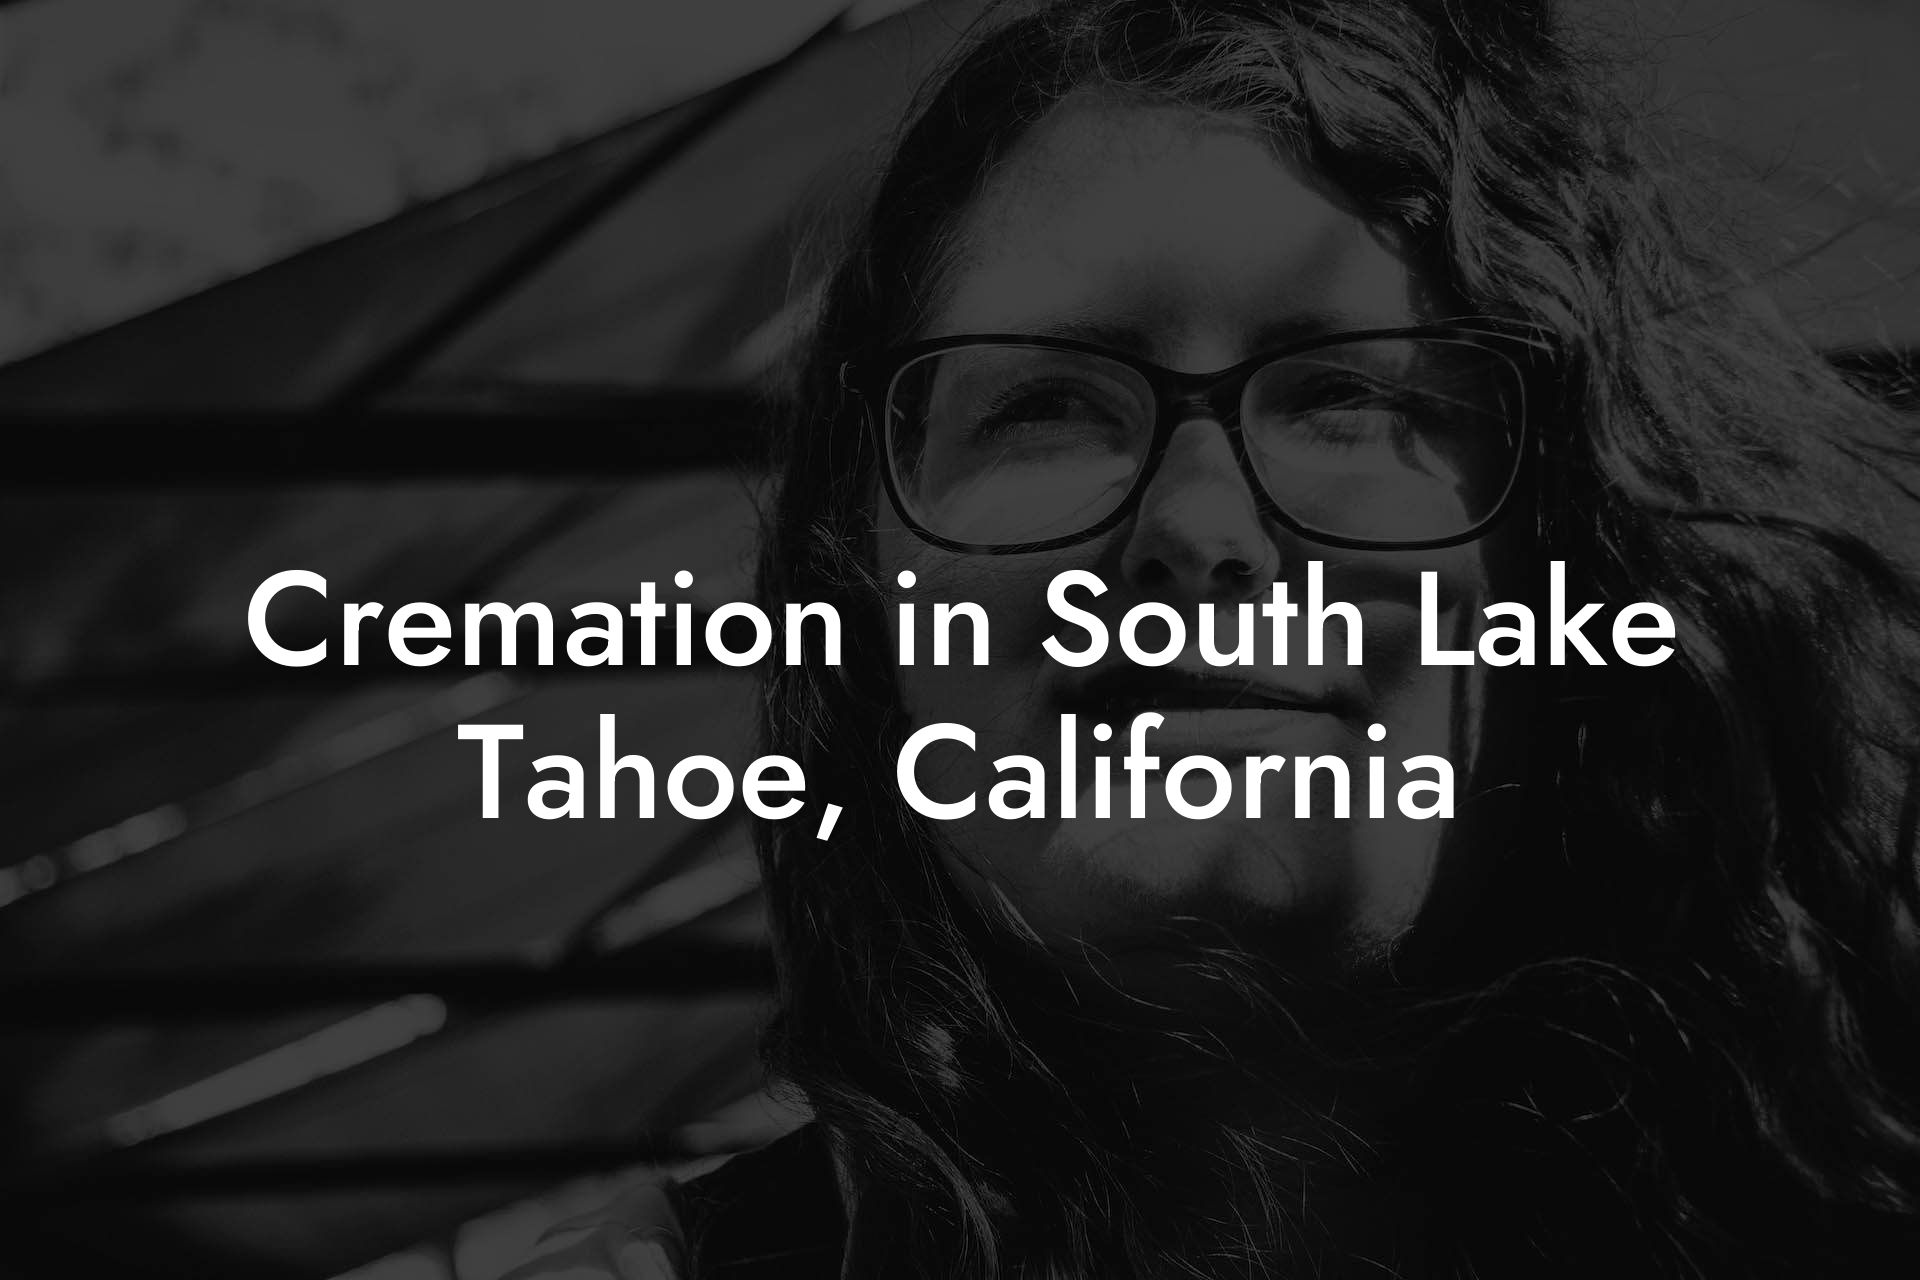 Cremation in South Lake Tahoe, California